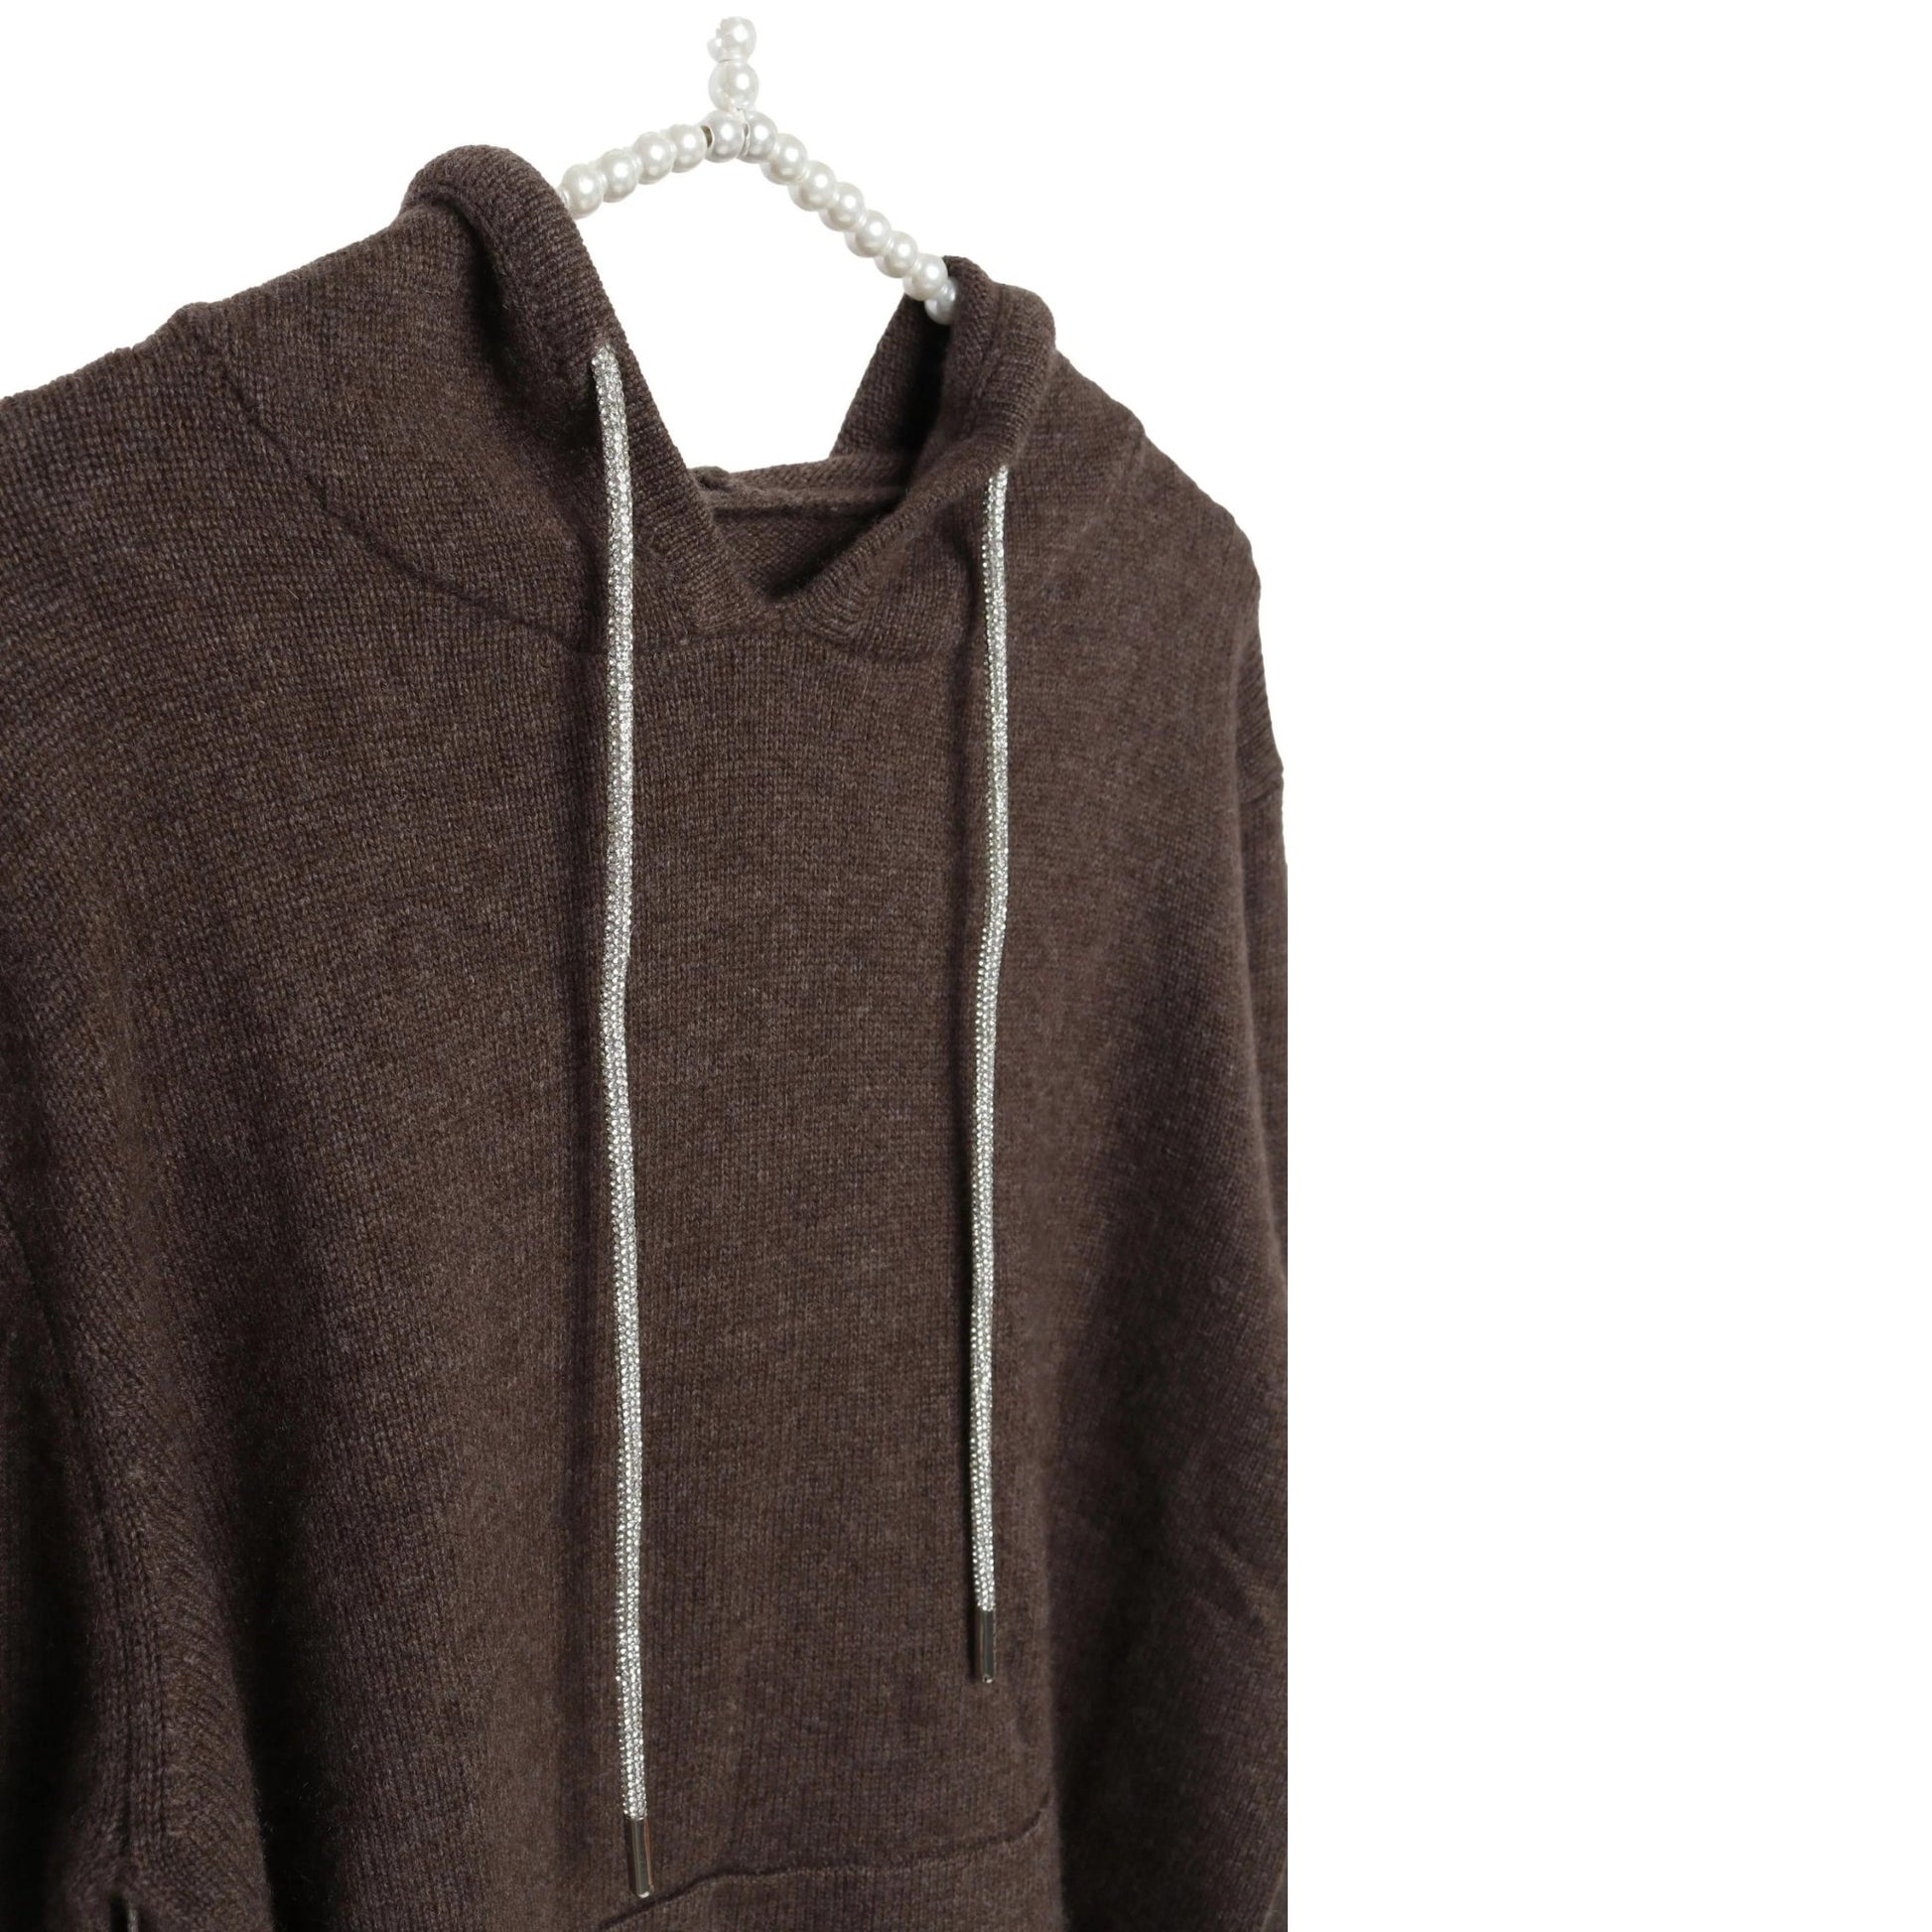 Dark Brown Cashmere Hoodie w/ Cheetah Heart Elbow Patches - Something about Sofia